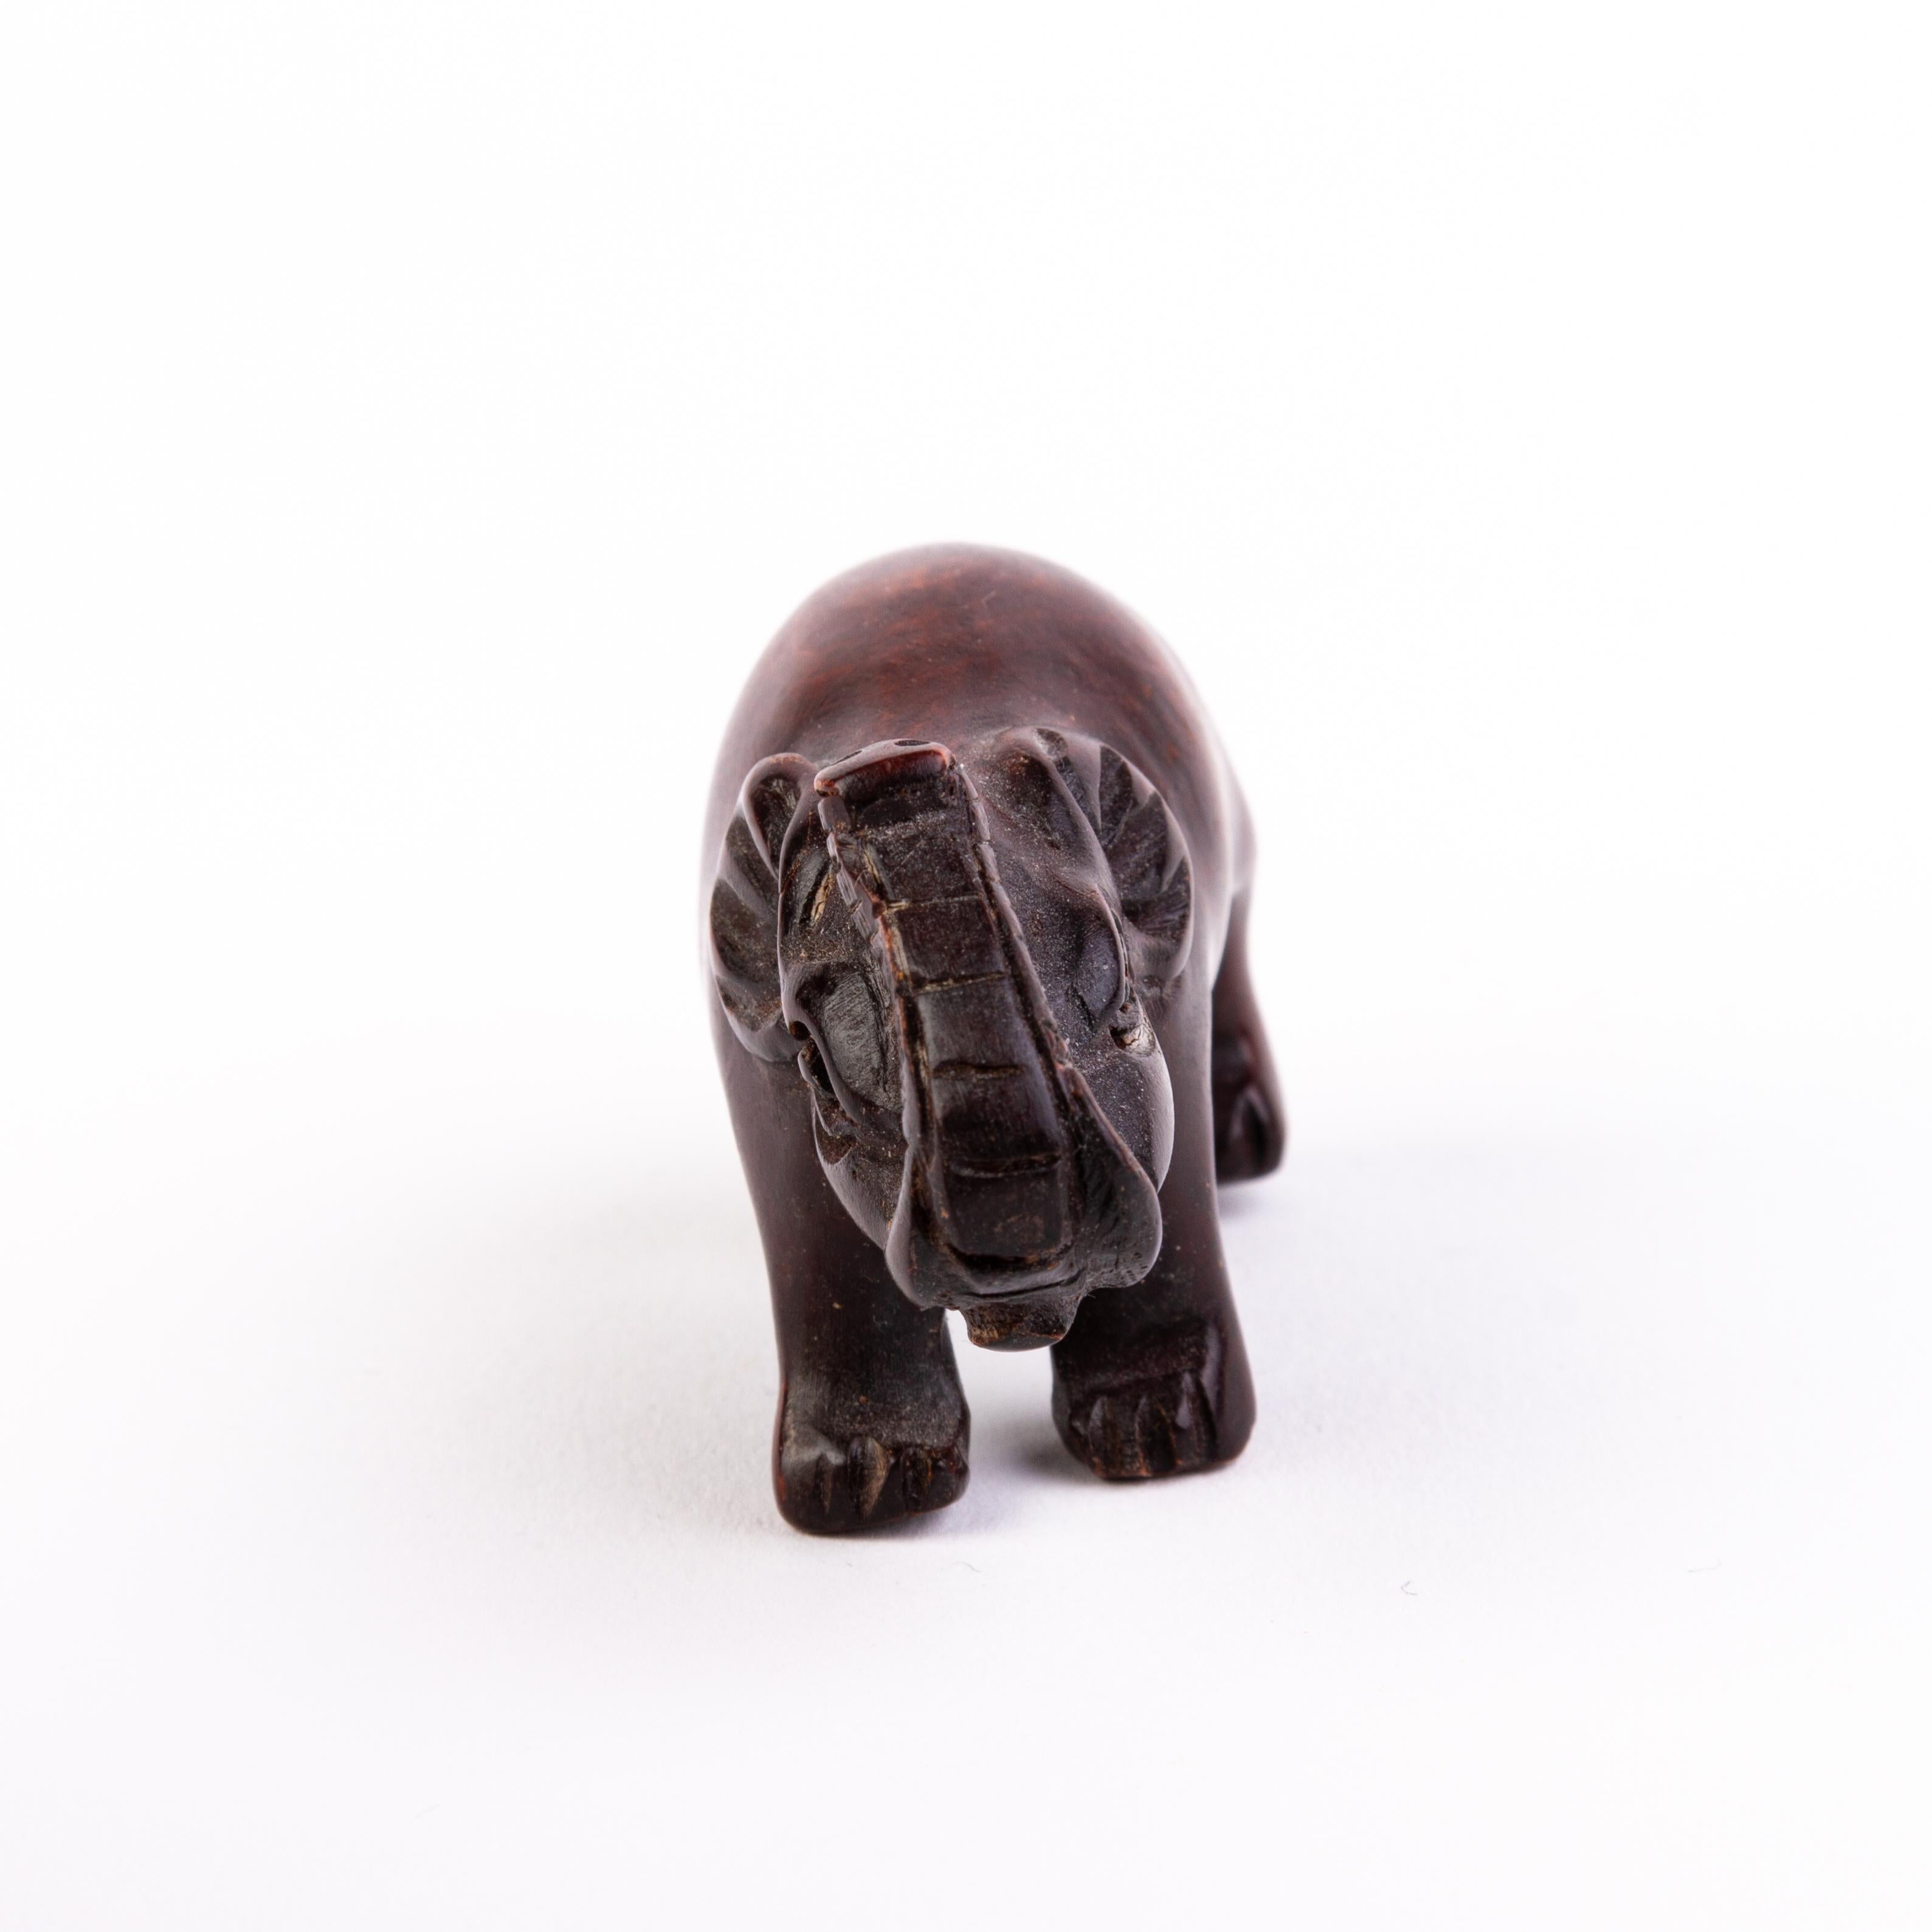 In good condition
From a private collection
Free international shipping
Signed Japanese Boxwood Netsuke Inro of an Elephant 